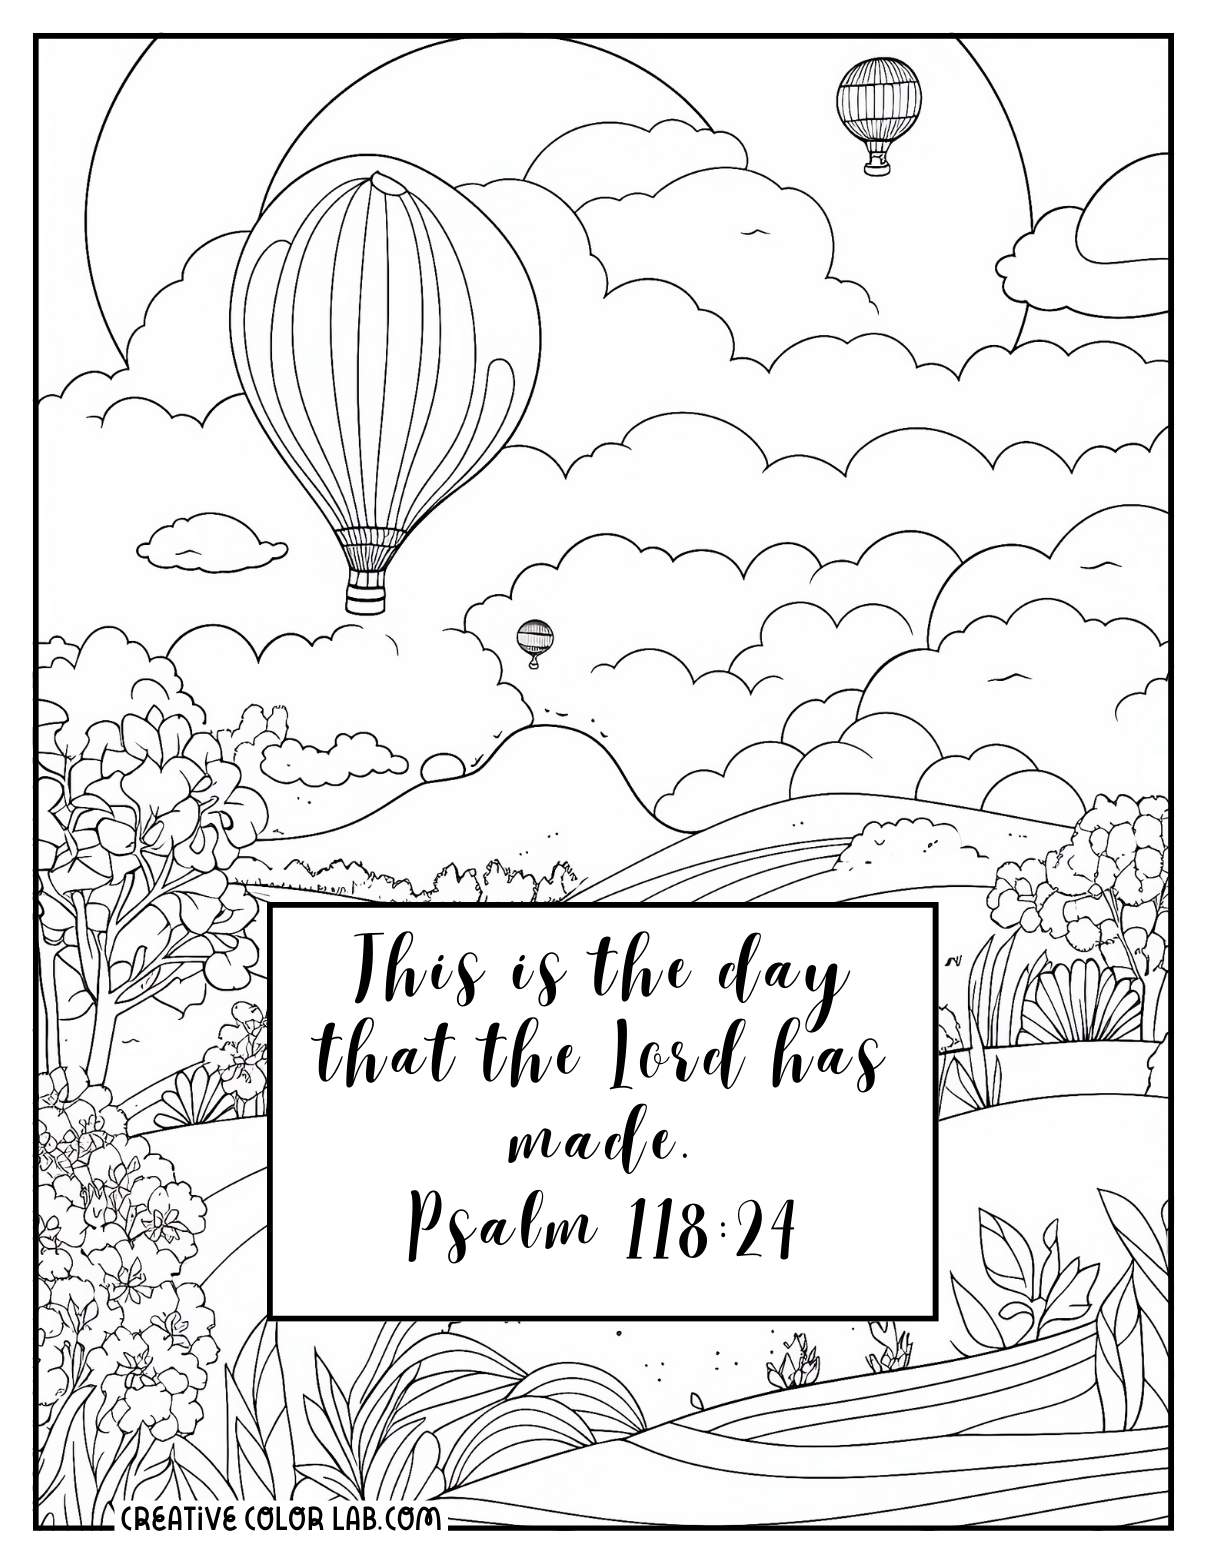 Gospel affirmation picture to color about Psalm 118:24.